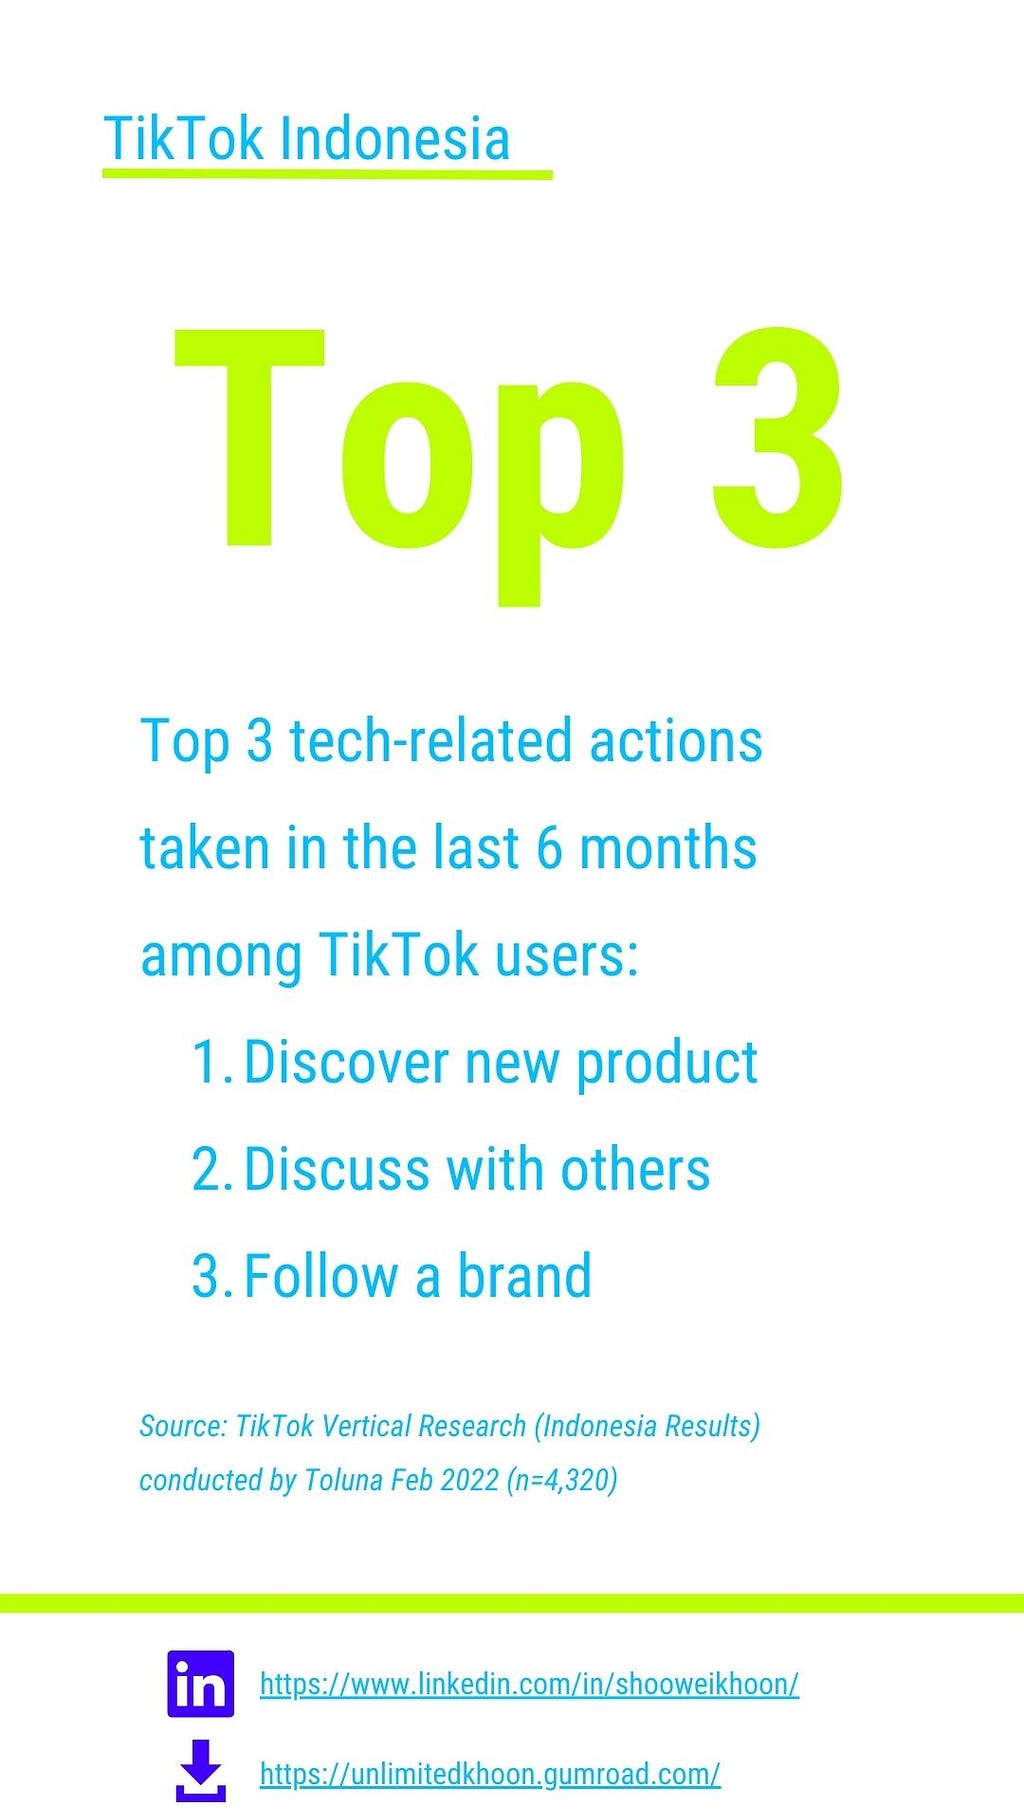 Top 3 tech-related actions taken in the last 6 months among TikTok users